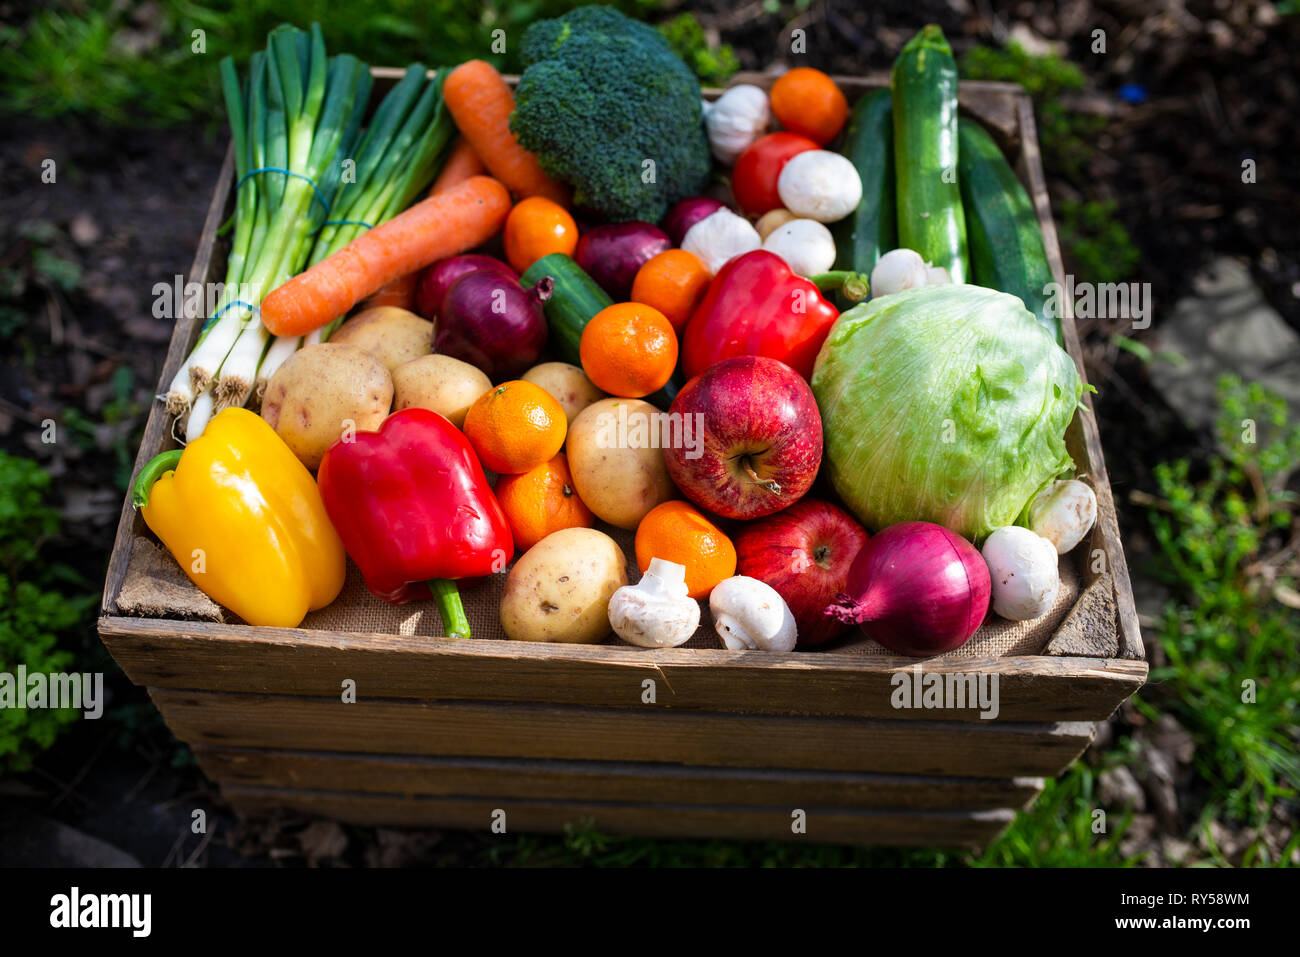 a vintage wooden crate filled with colourful fresh fruit and vegetables to promote healthy vegan living Stock Photo